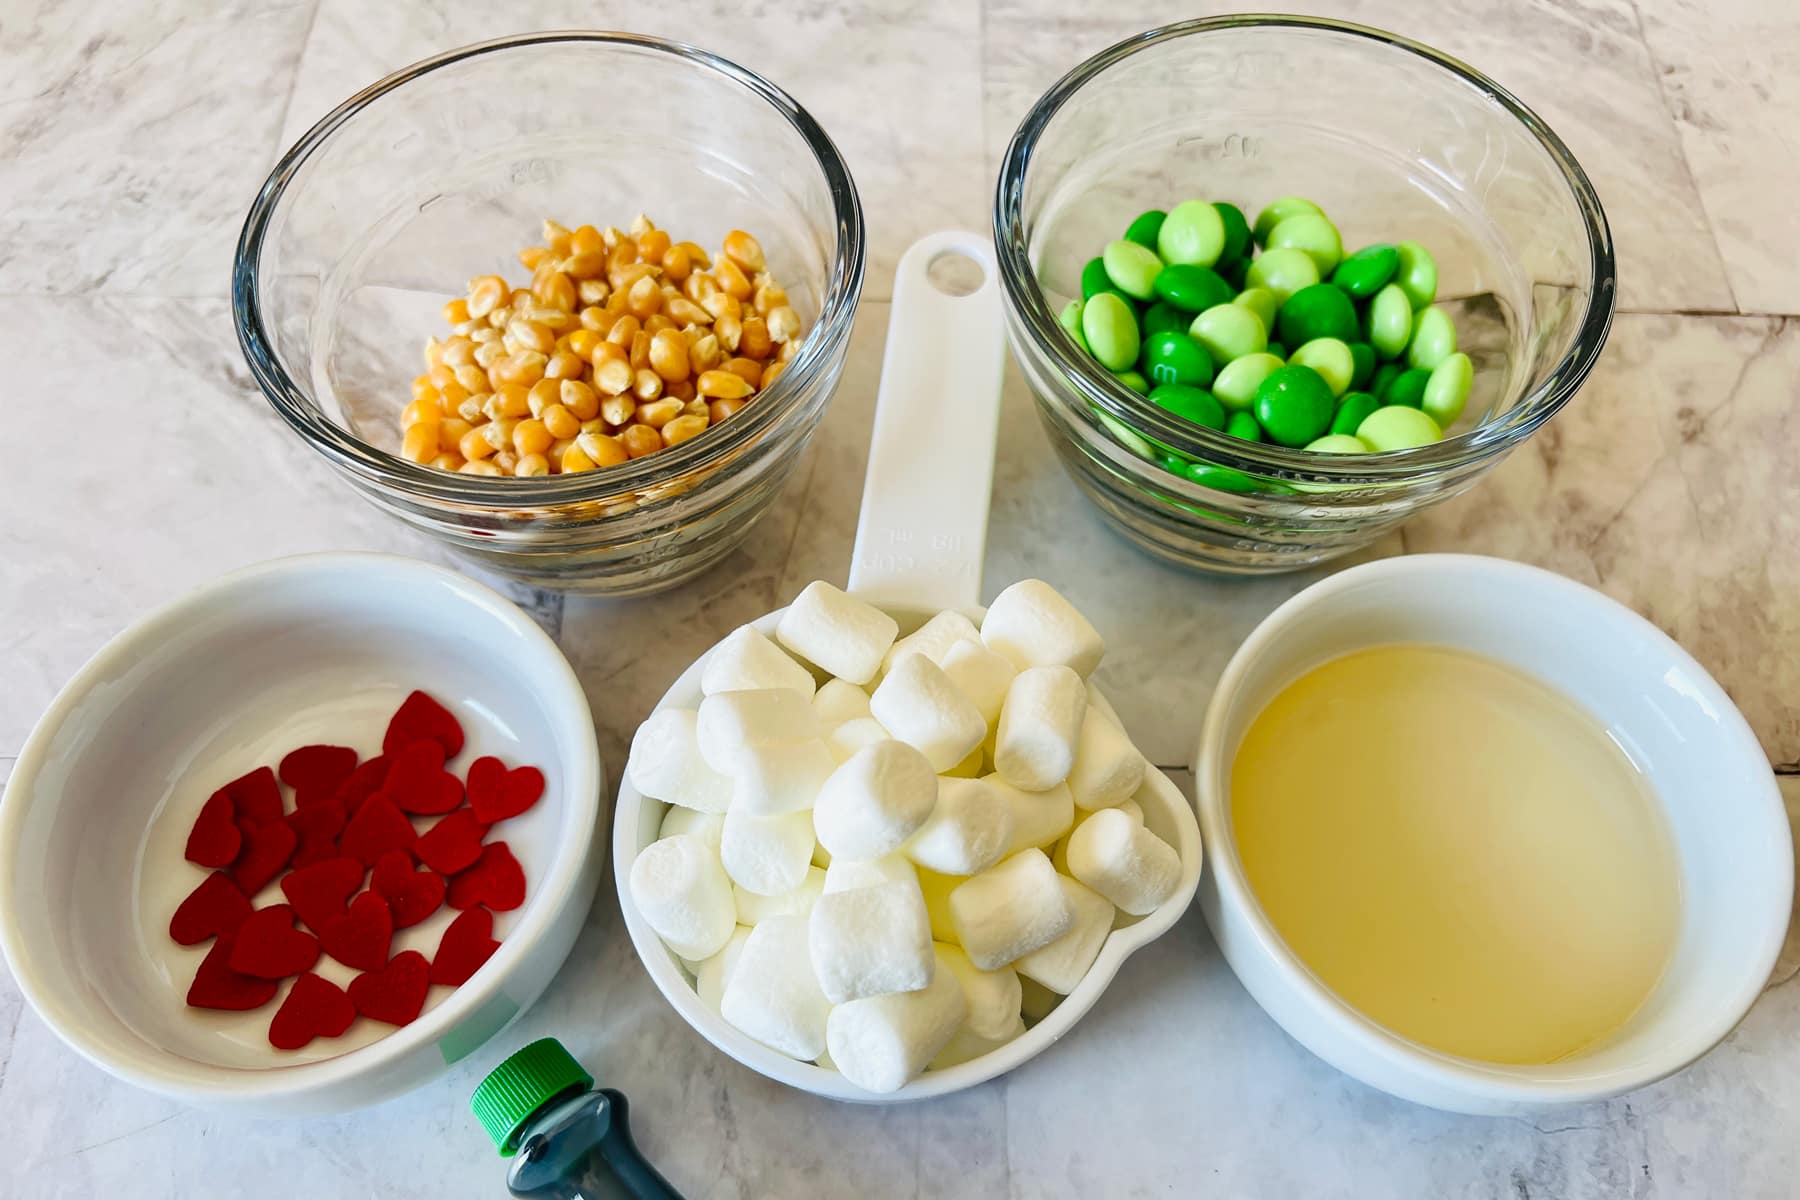 Grinch popcorn ingredients include ½ cup popcorn kernels, 2-3 tablespoons vegetable oil, Pinch of salt, Green regular and oil based food coloring, Green M&M candies, Mini marshmallows, Red decorator candy hearts